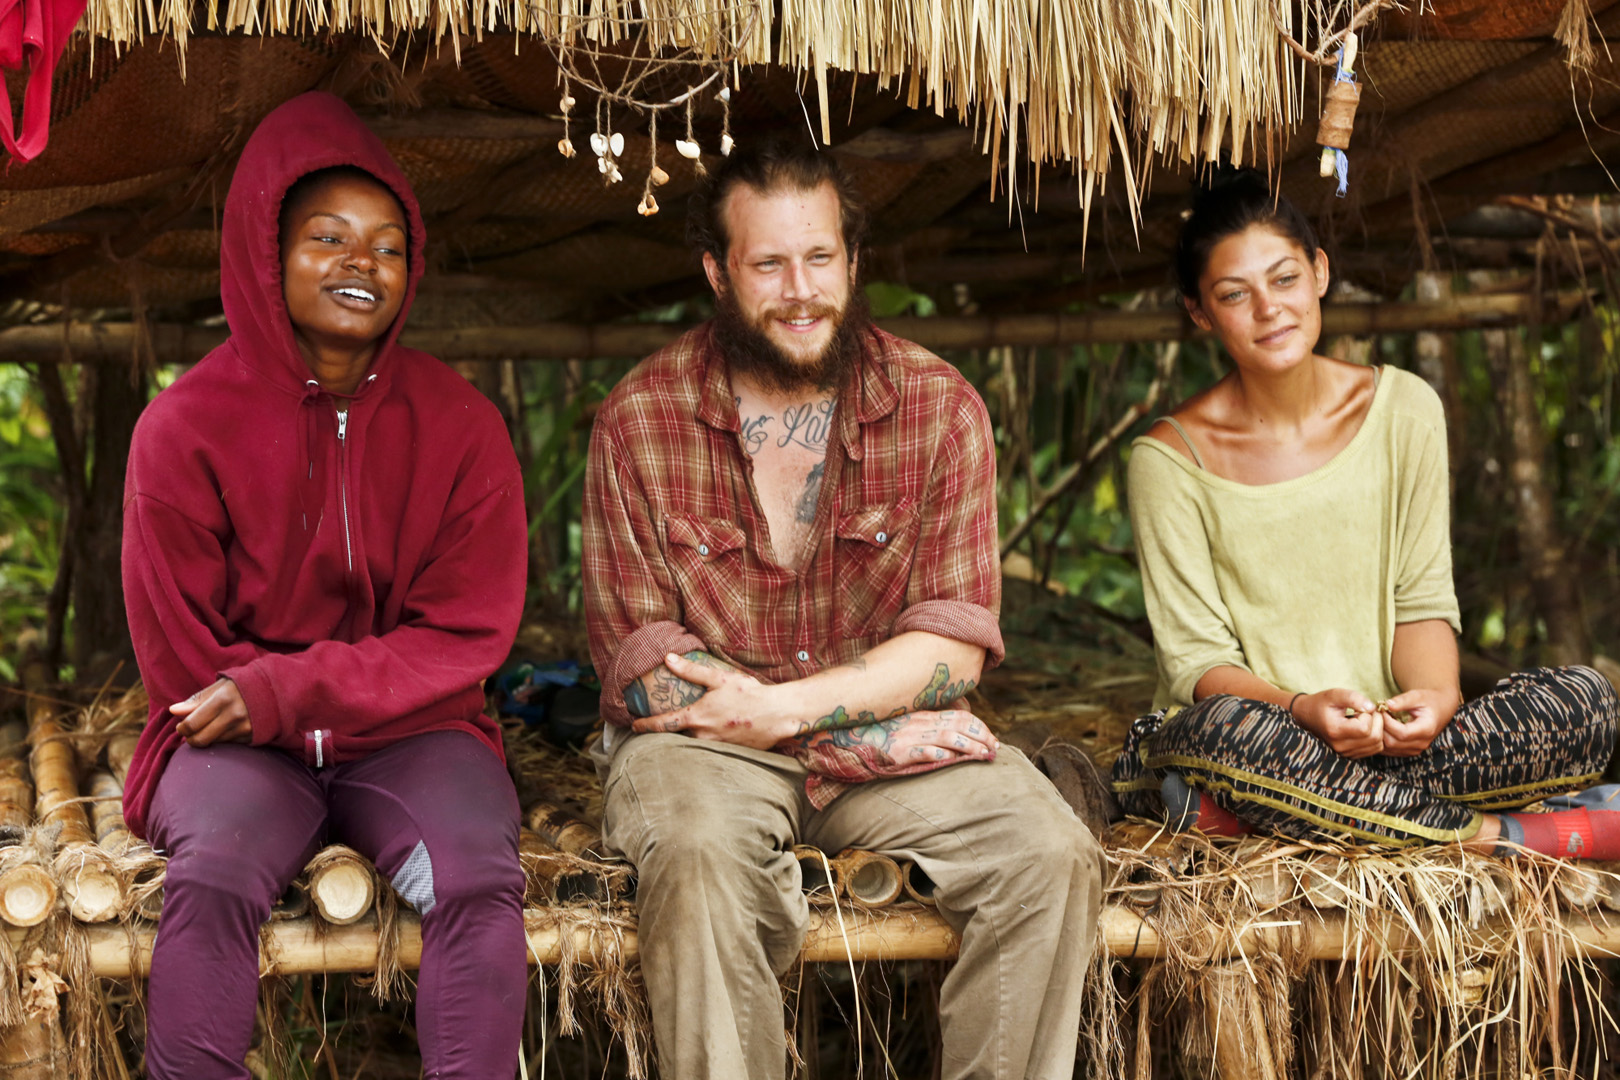 Survivor Kaoh Rong: Merge Episode Changes the Game